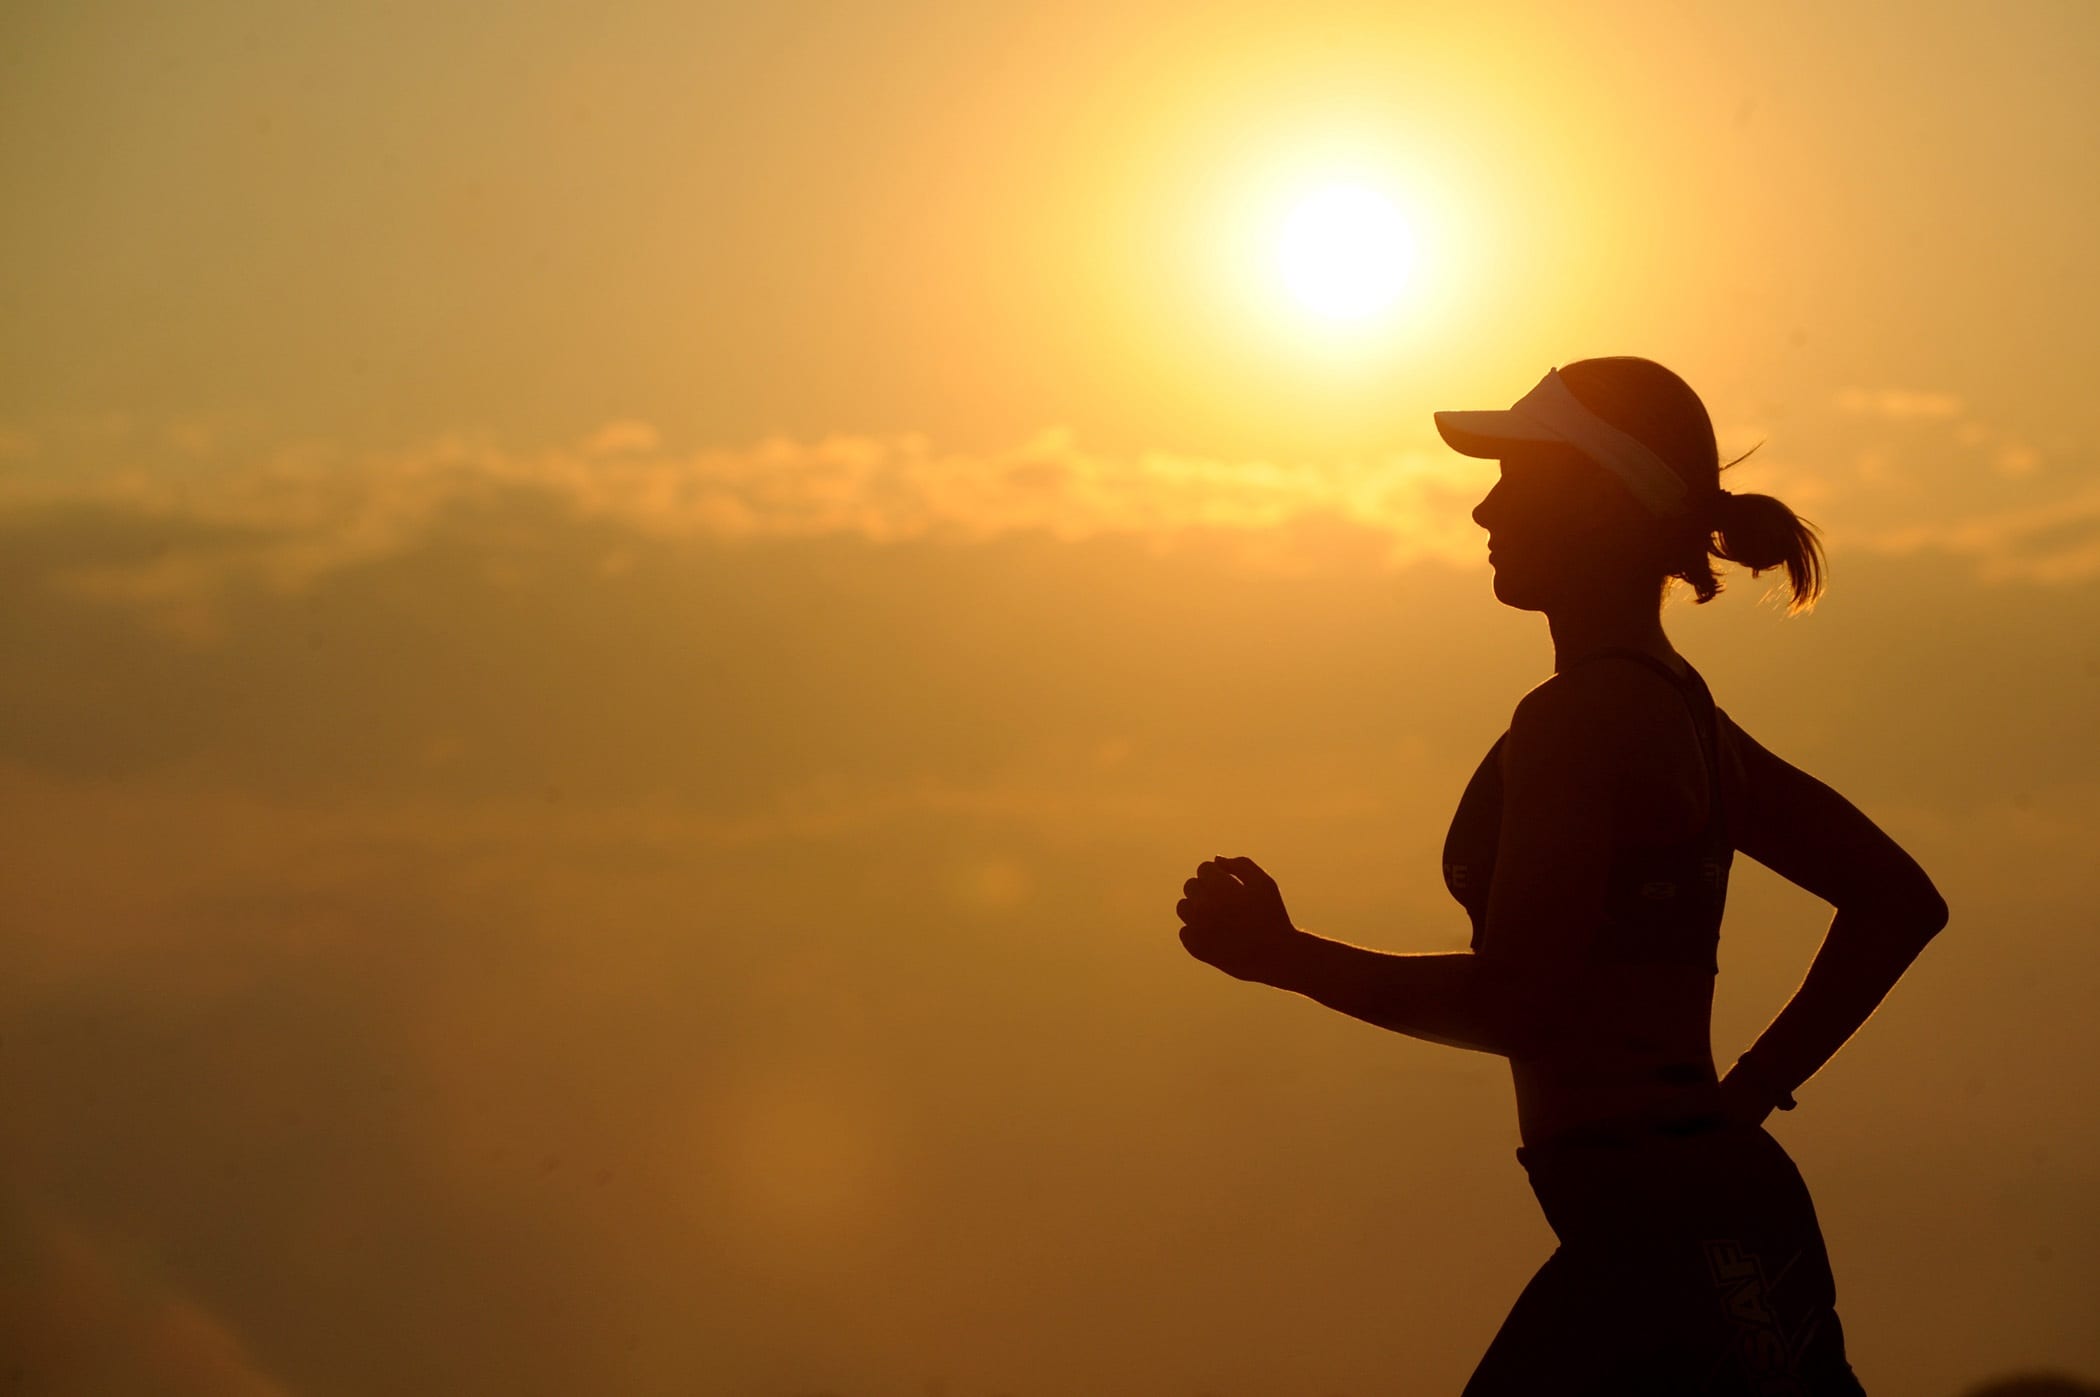 improving mental health with running